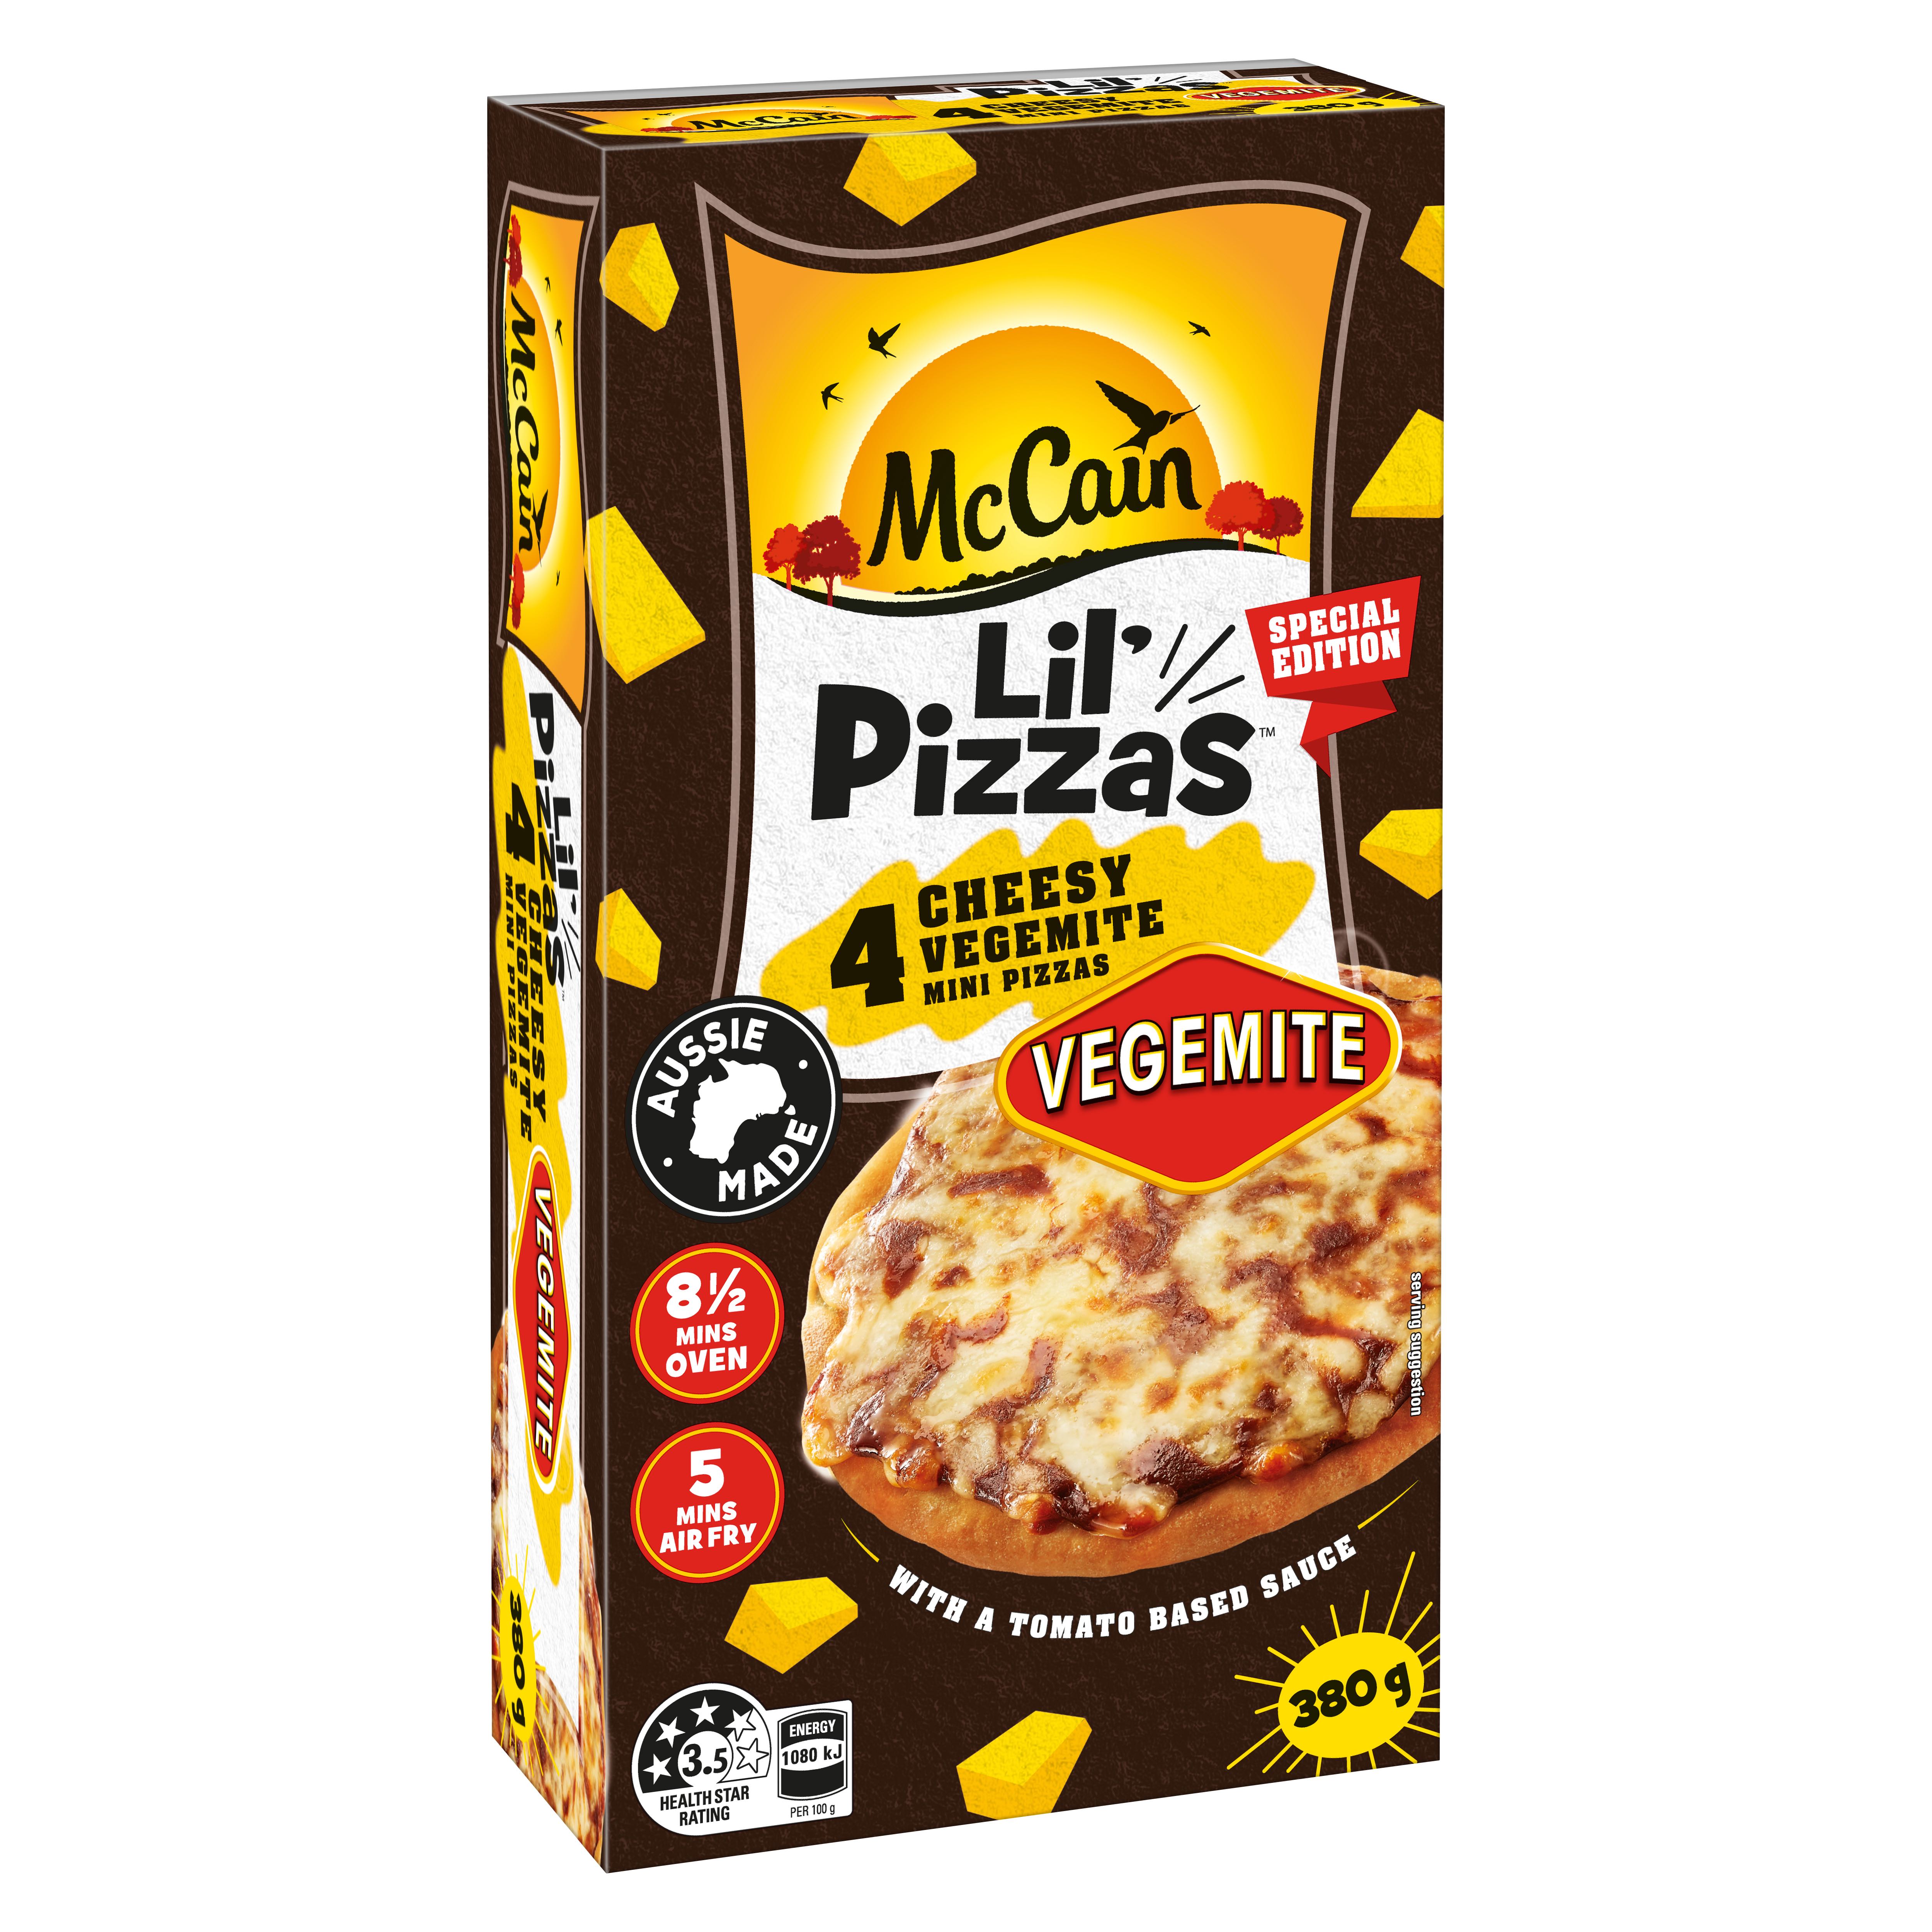 McCain And Vegemite Collab On Pizza Pockets and Lil Pizzas